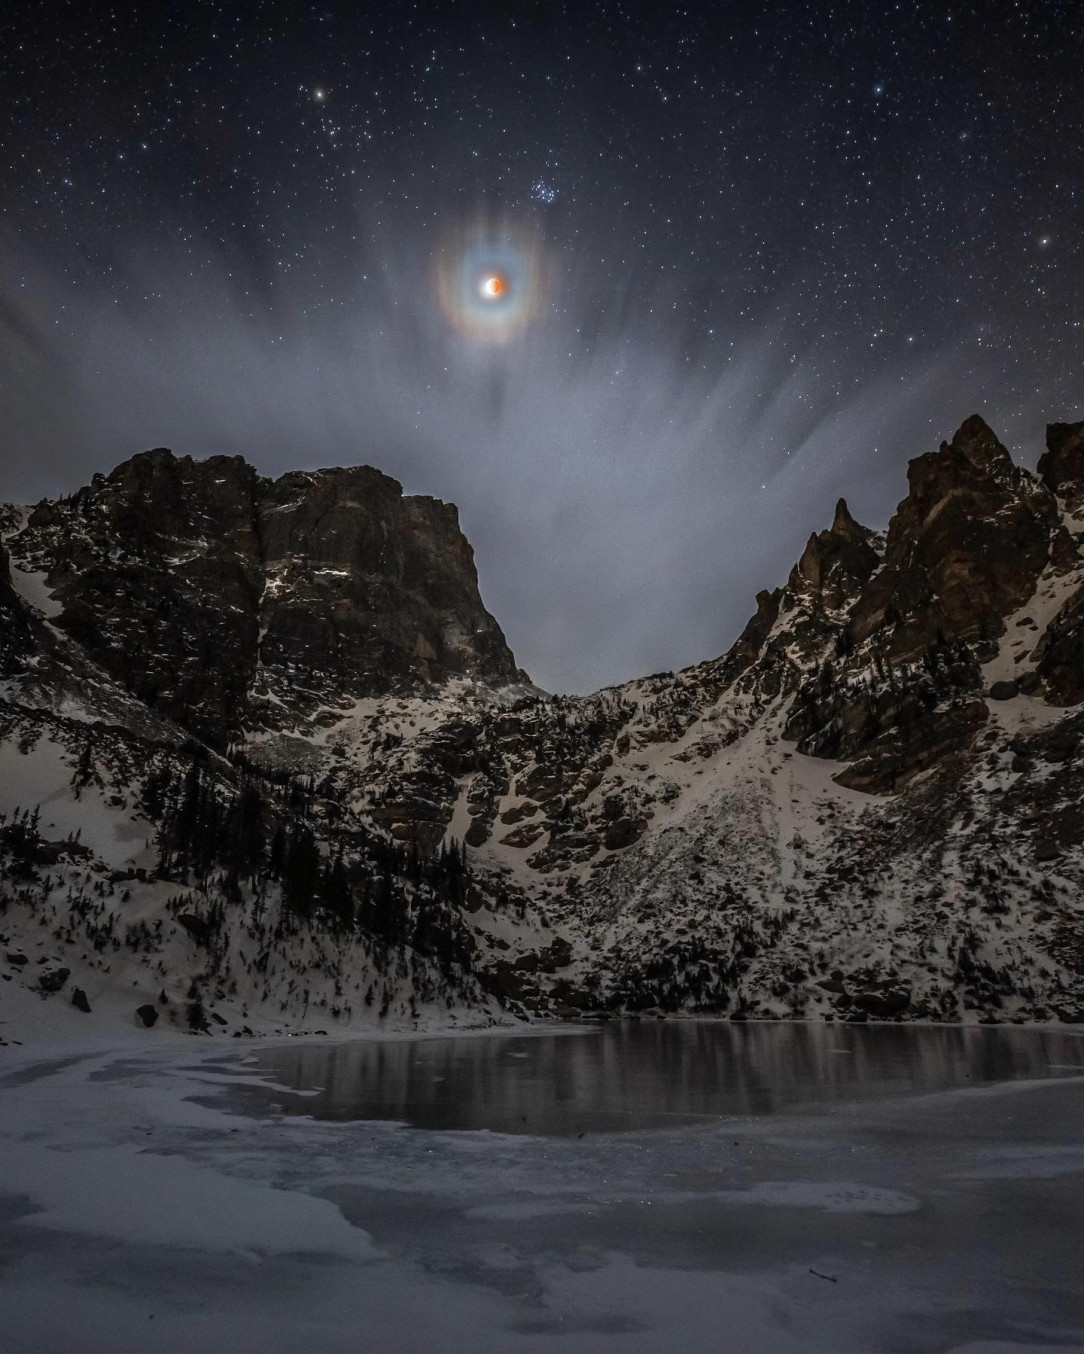 Watched the eclipse from a frozen lake in Rocky Mountain National Park